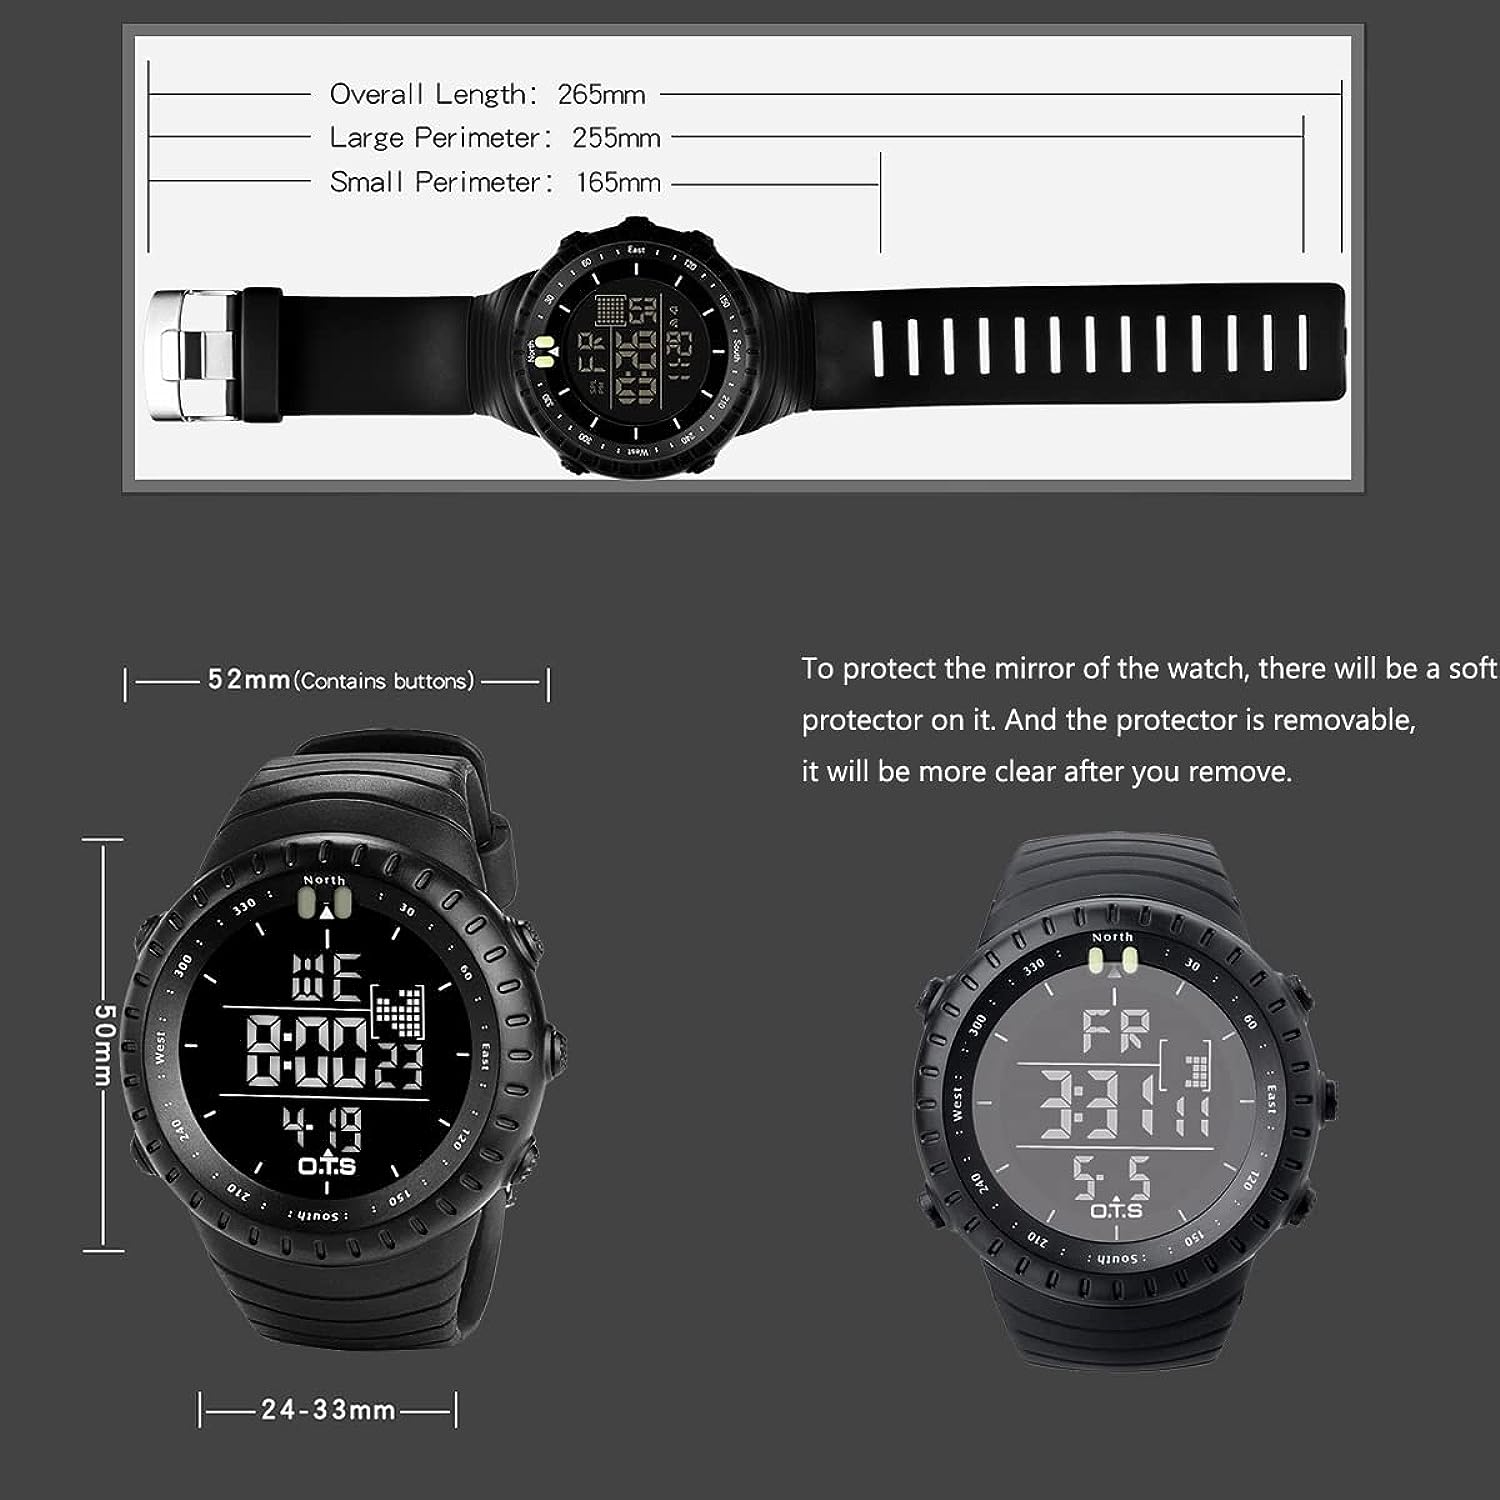 PALADA Mens Digital Sports Watch Waterproof Tactical Watch with LED Backlight Watch for Men